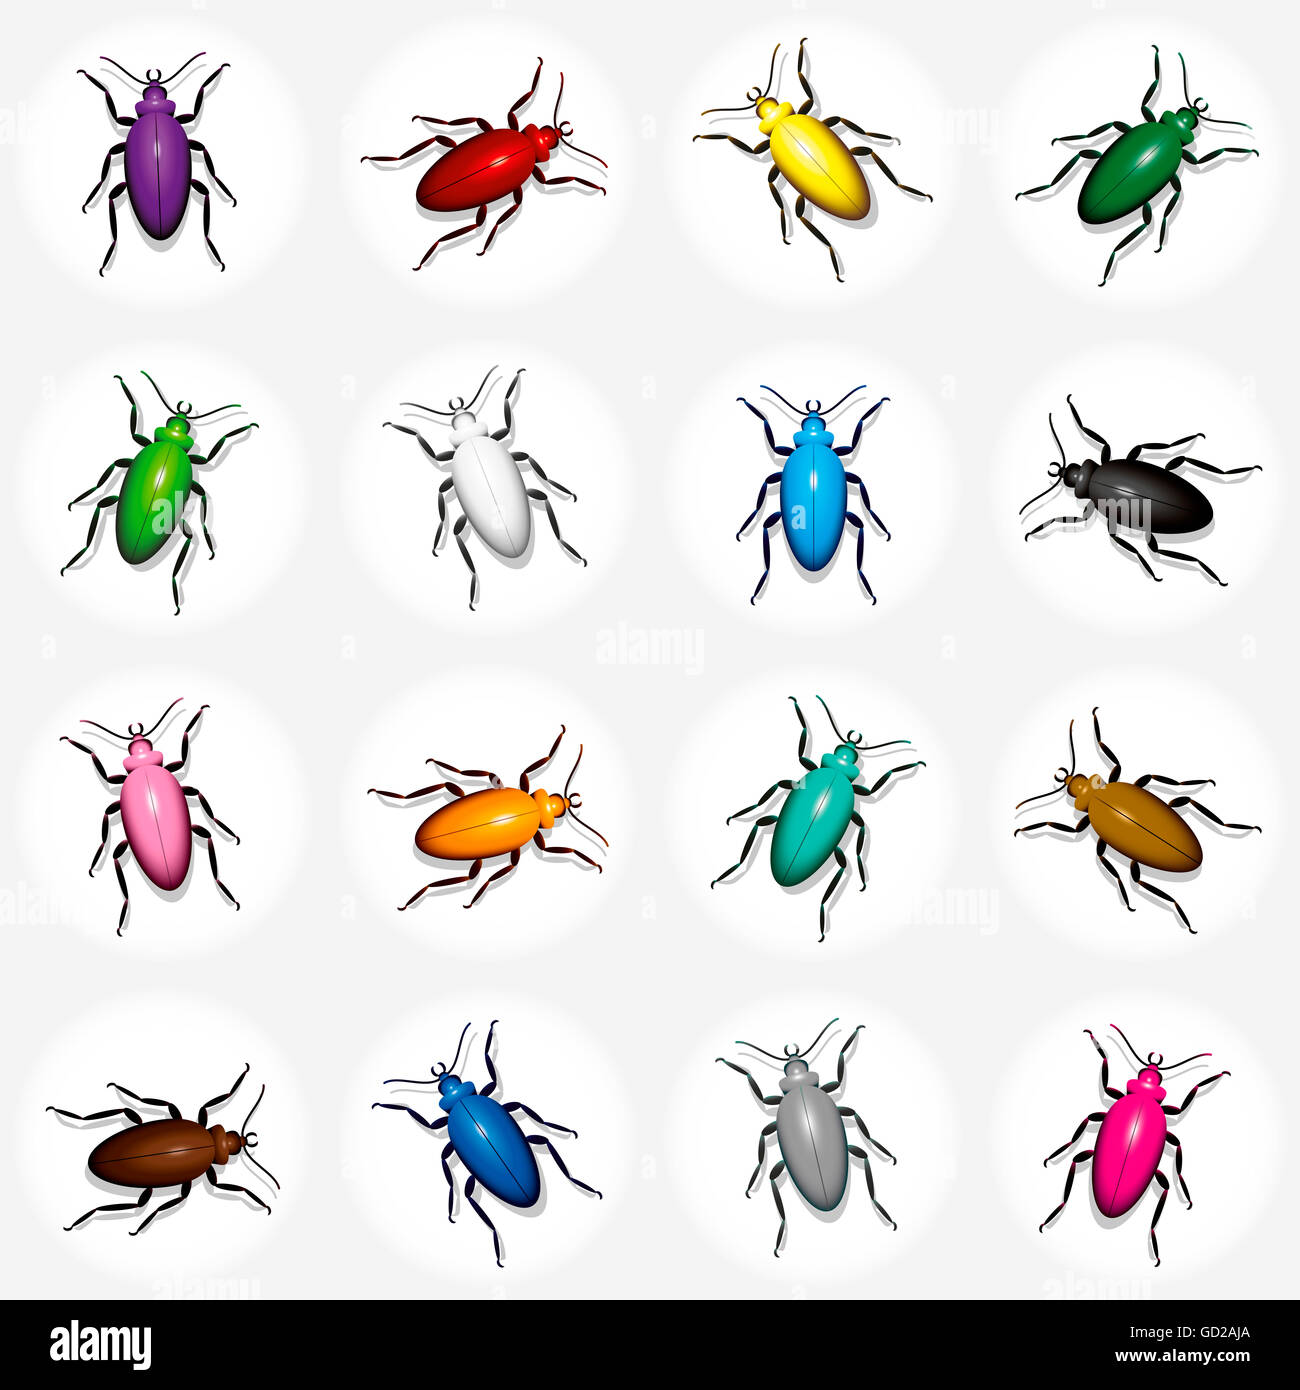 Beetles - colorful swarm of sixteen glossy bugs in spotlights. Stock Photo